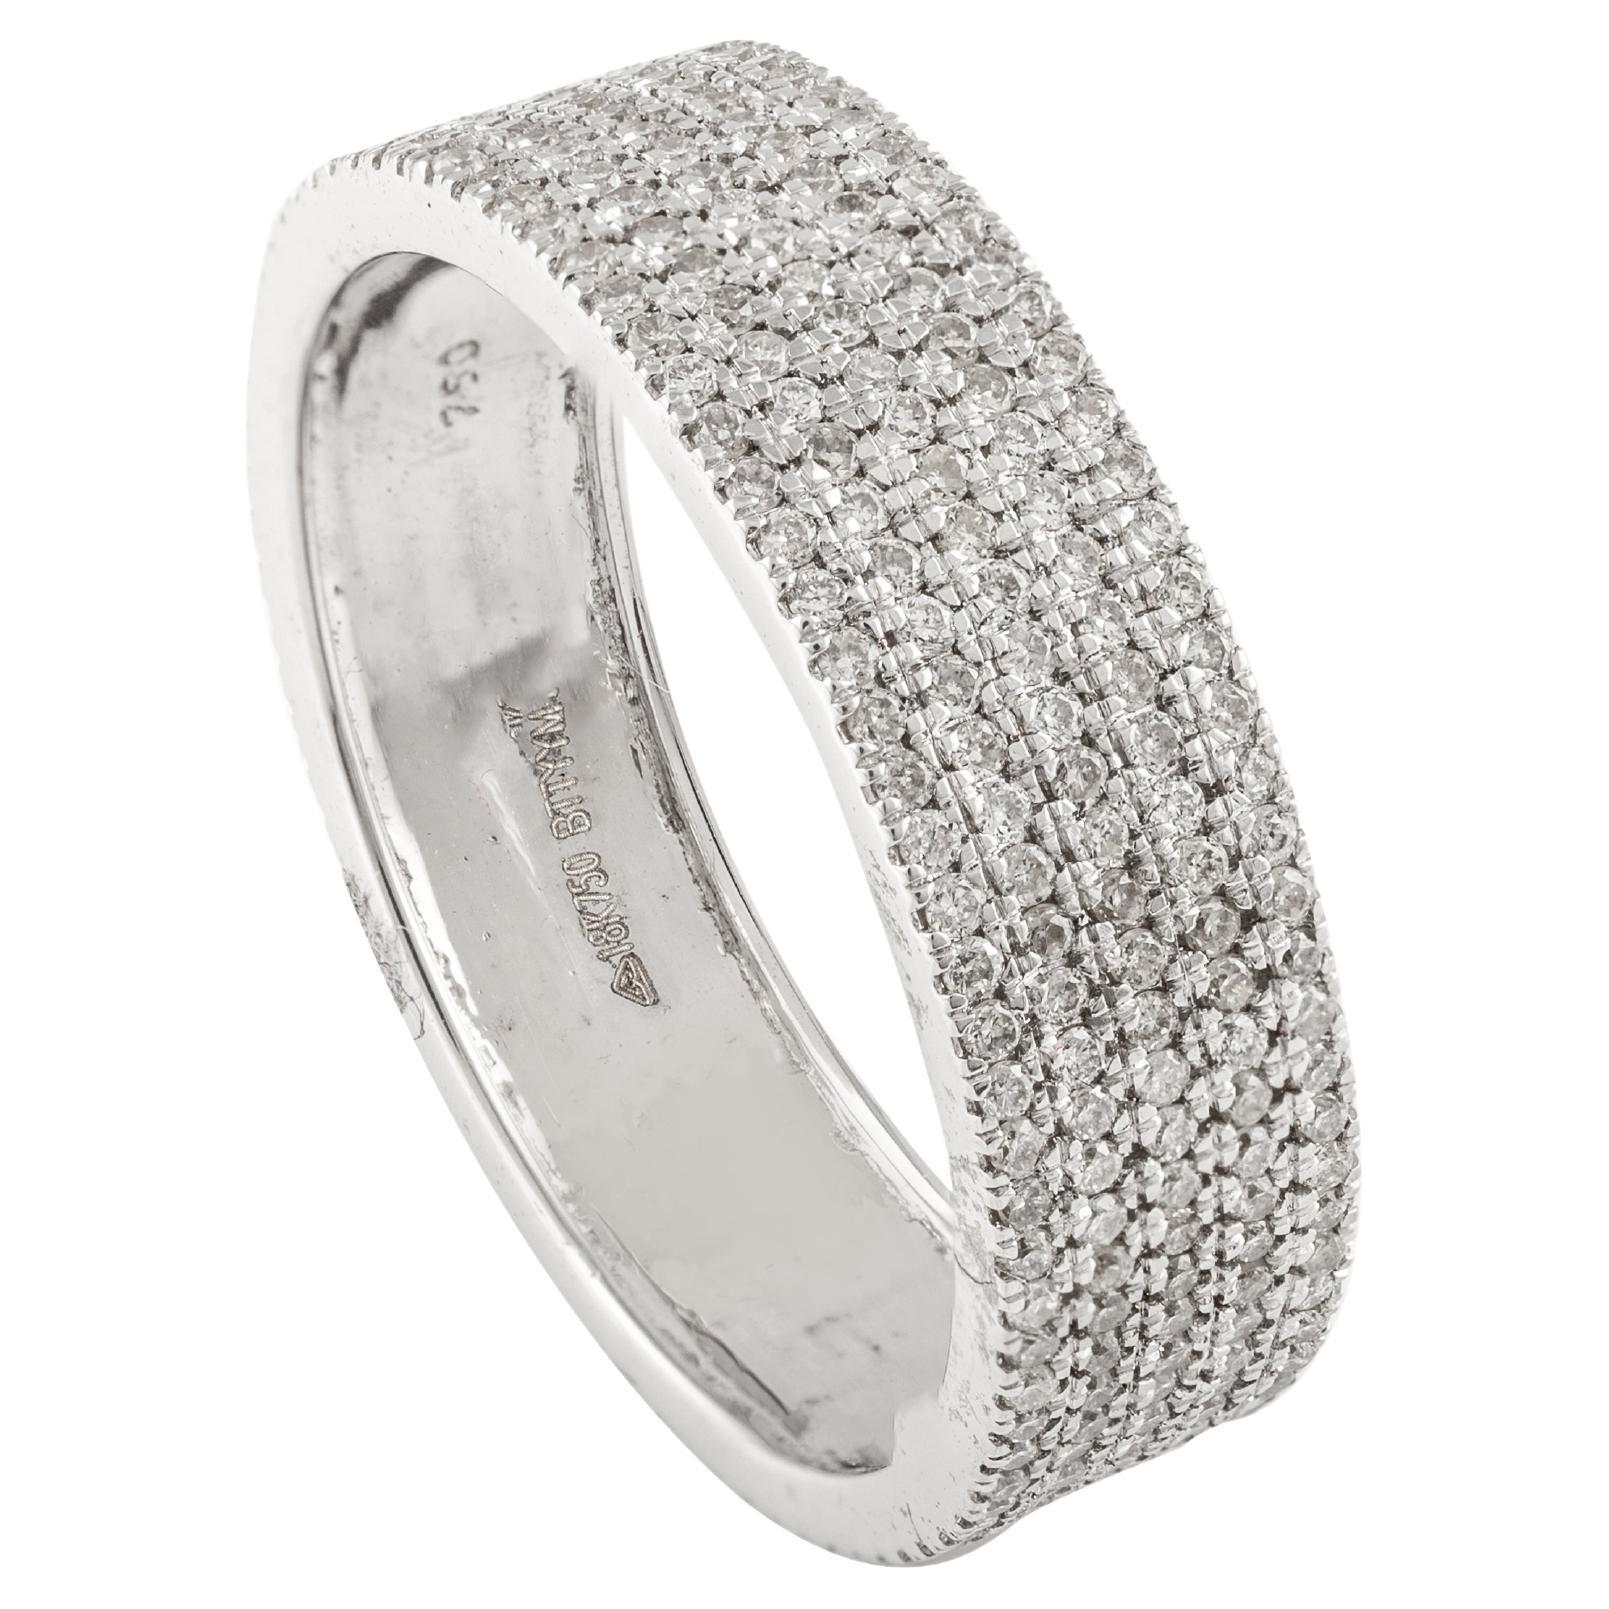 For Sale:  Unisex Pave Set Diamond Engagement Band Ring in 18k Solid White Gold